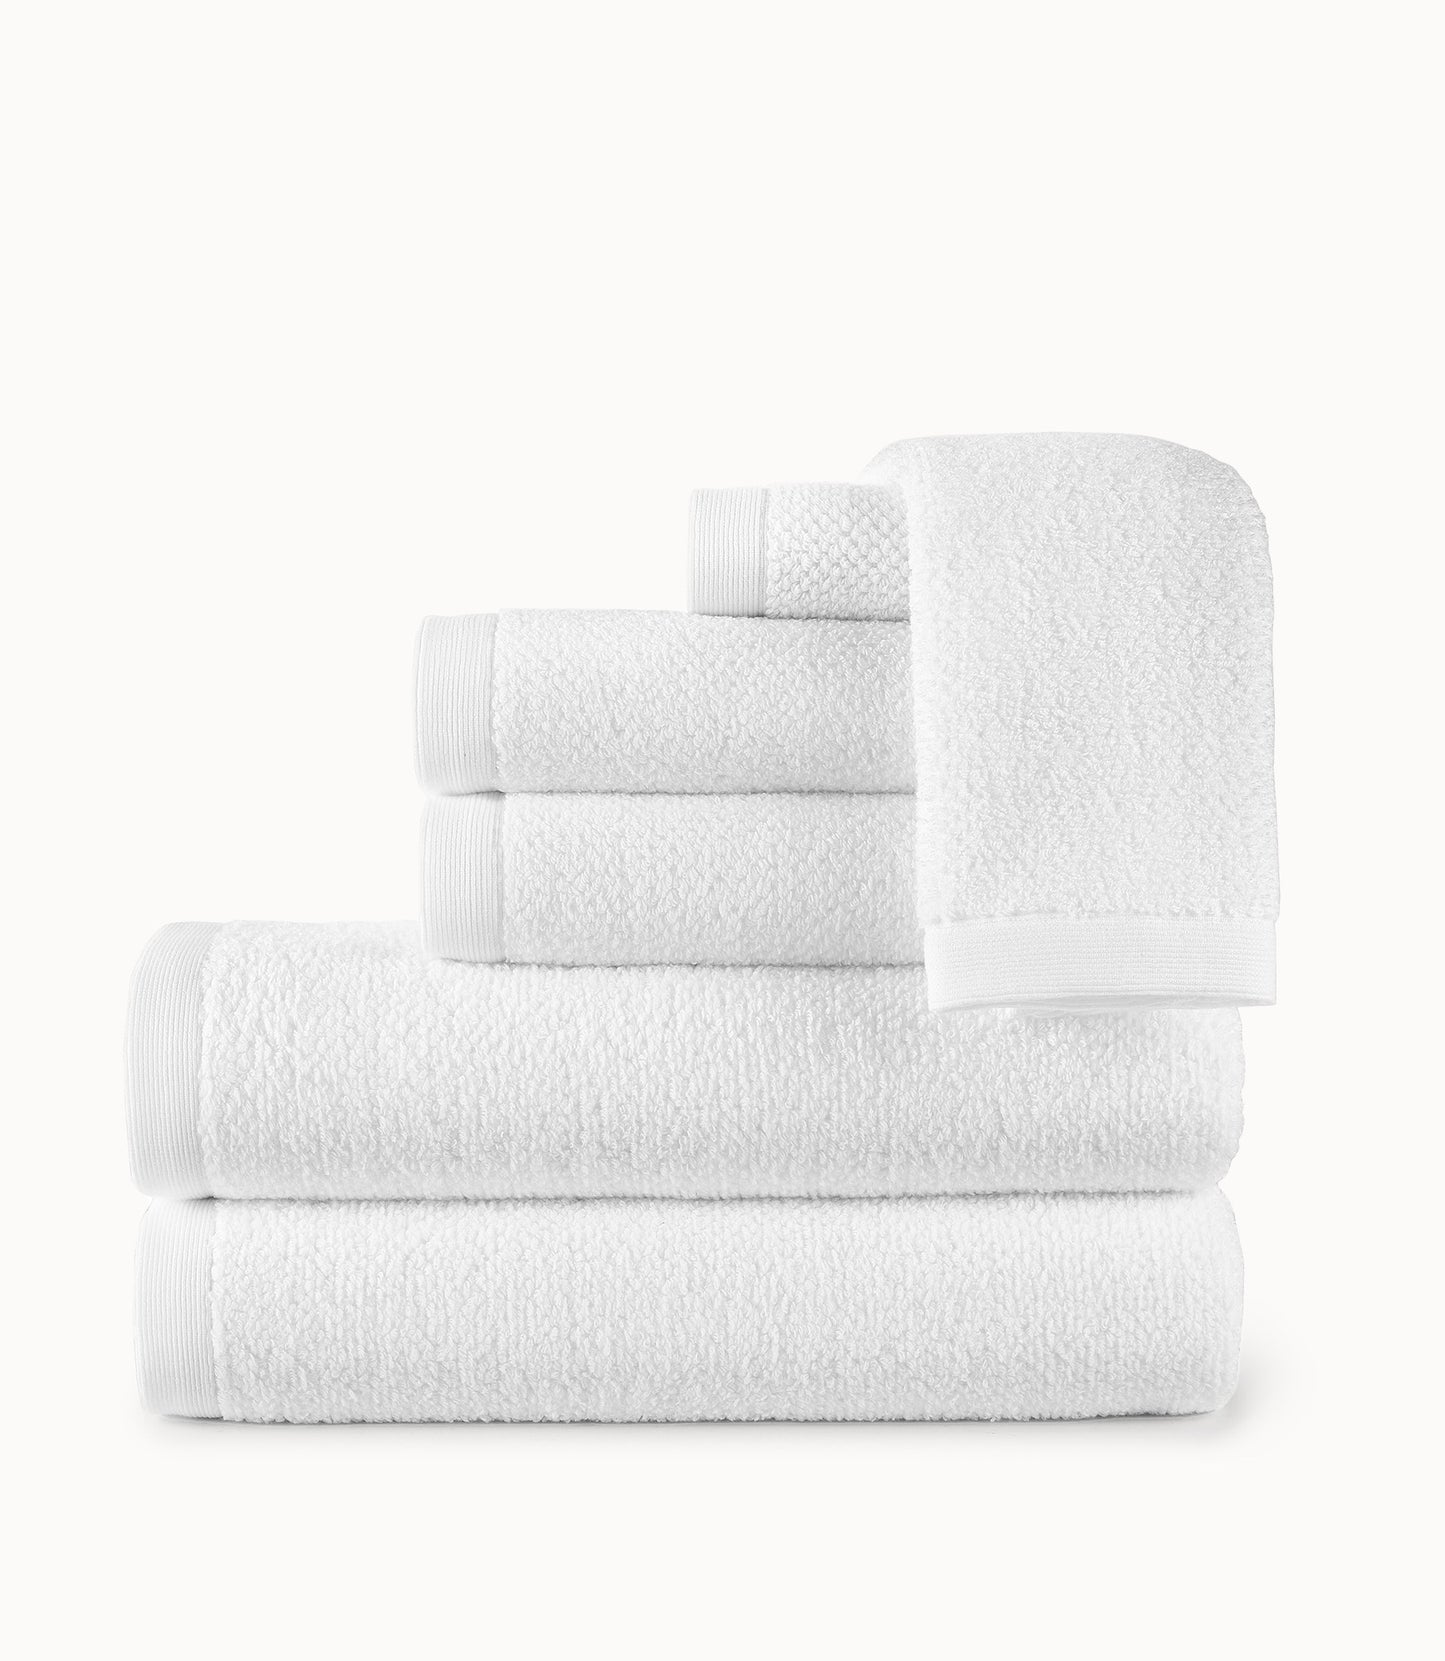 Luxury Towels: How to Choose the Best Quality Bath Towels – Peacock Alley